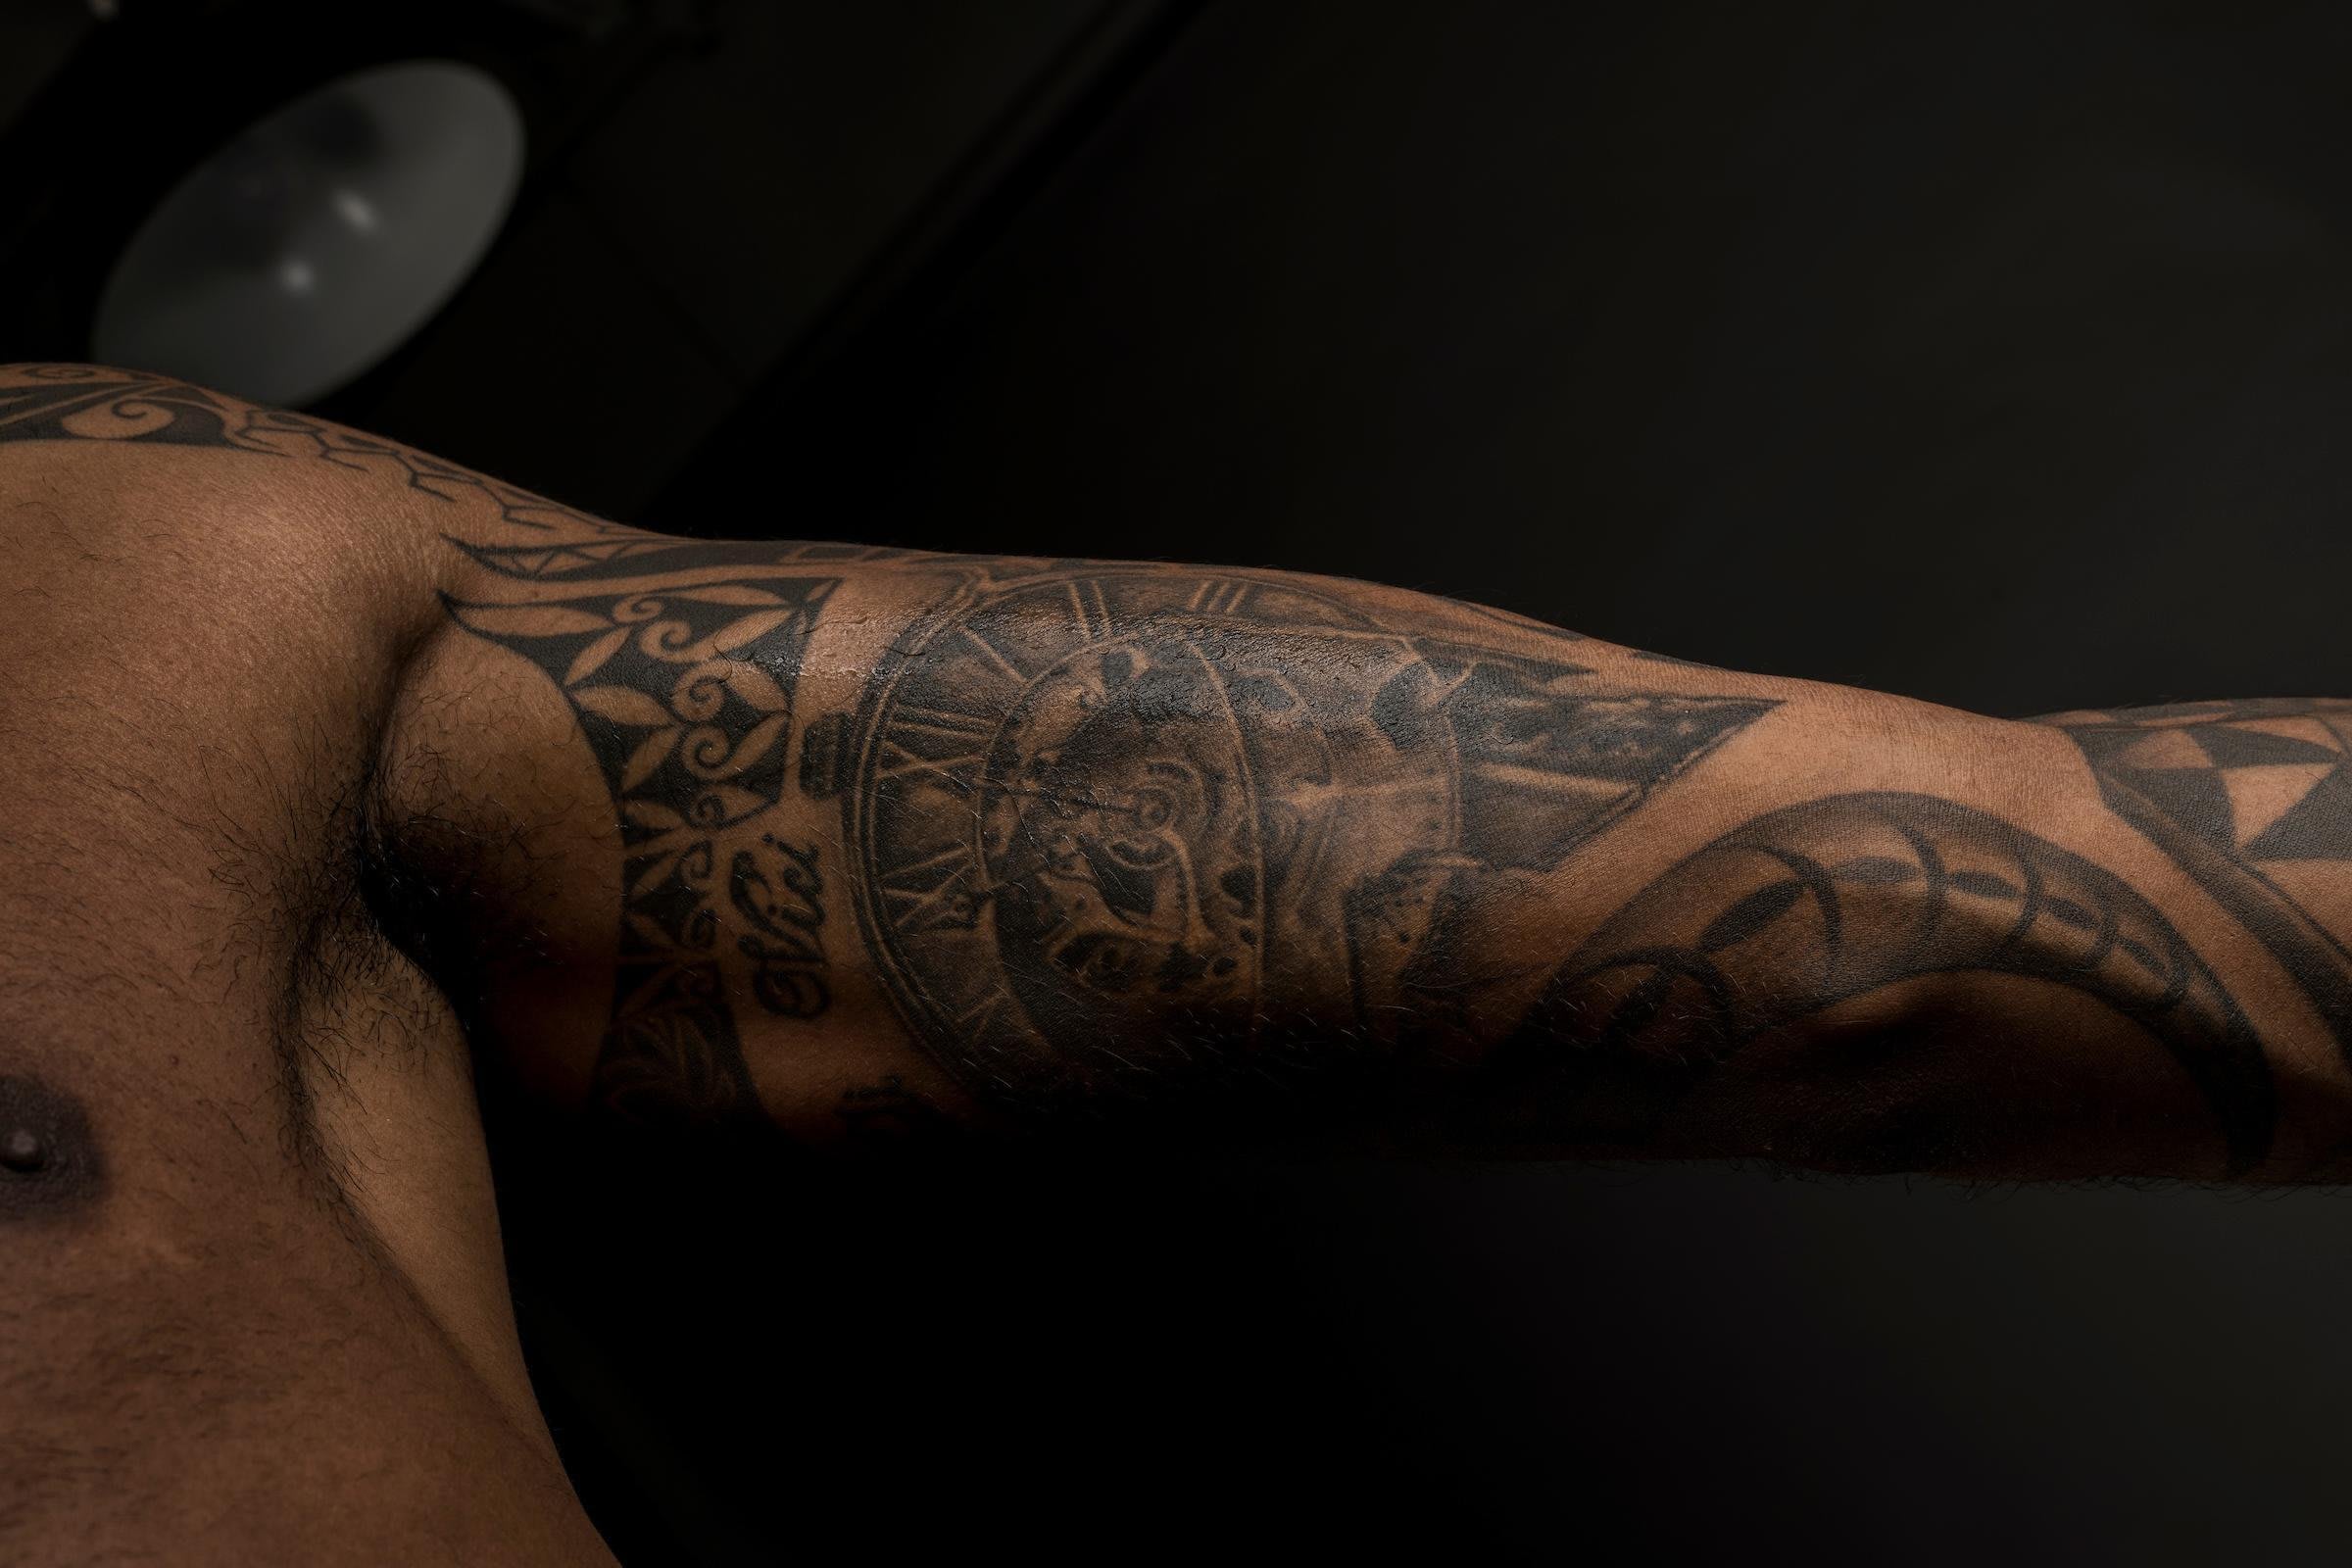 KL Rahul's tattoos & their meanings: His 7 favourites